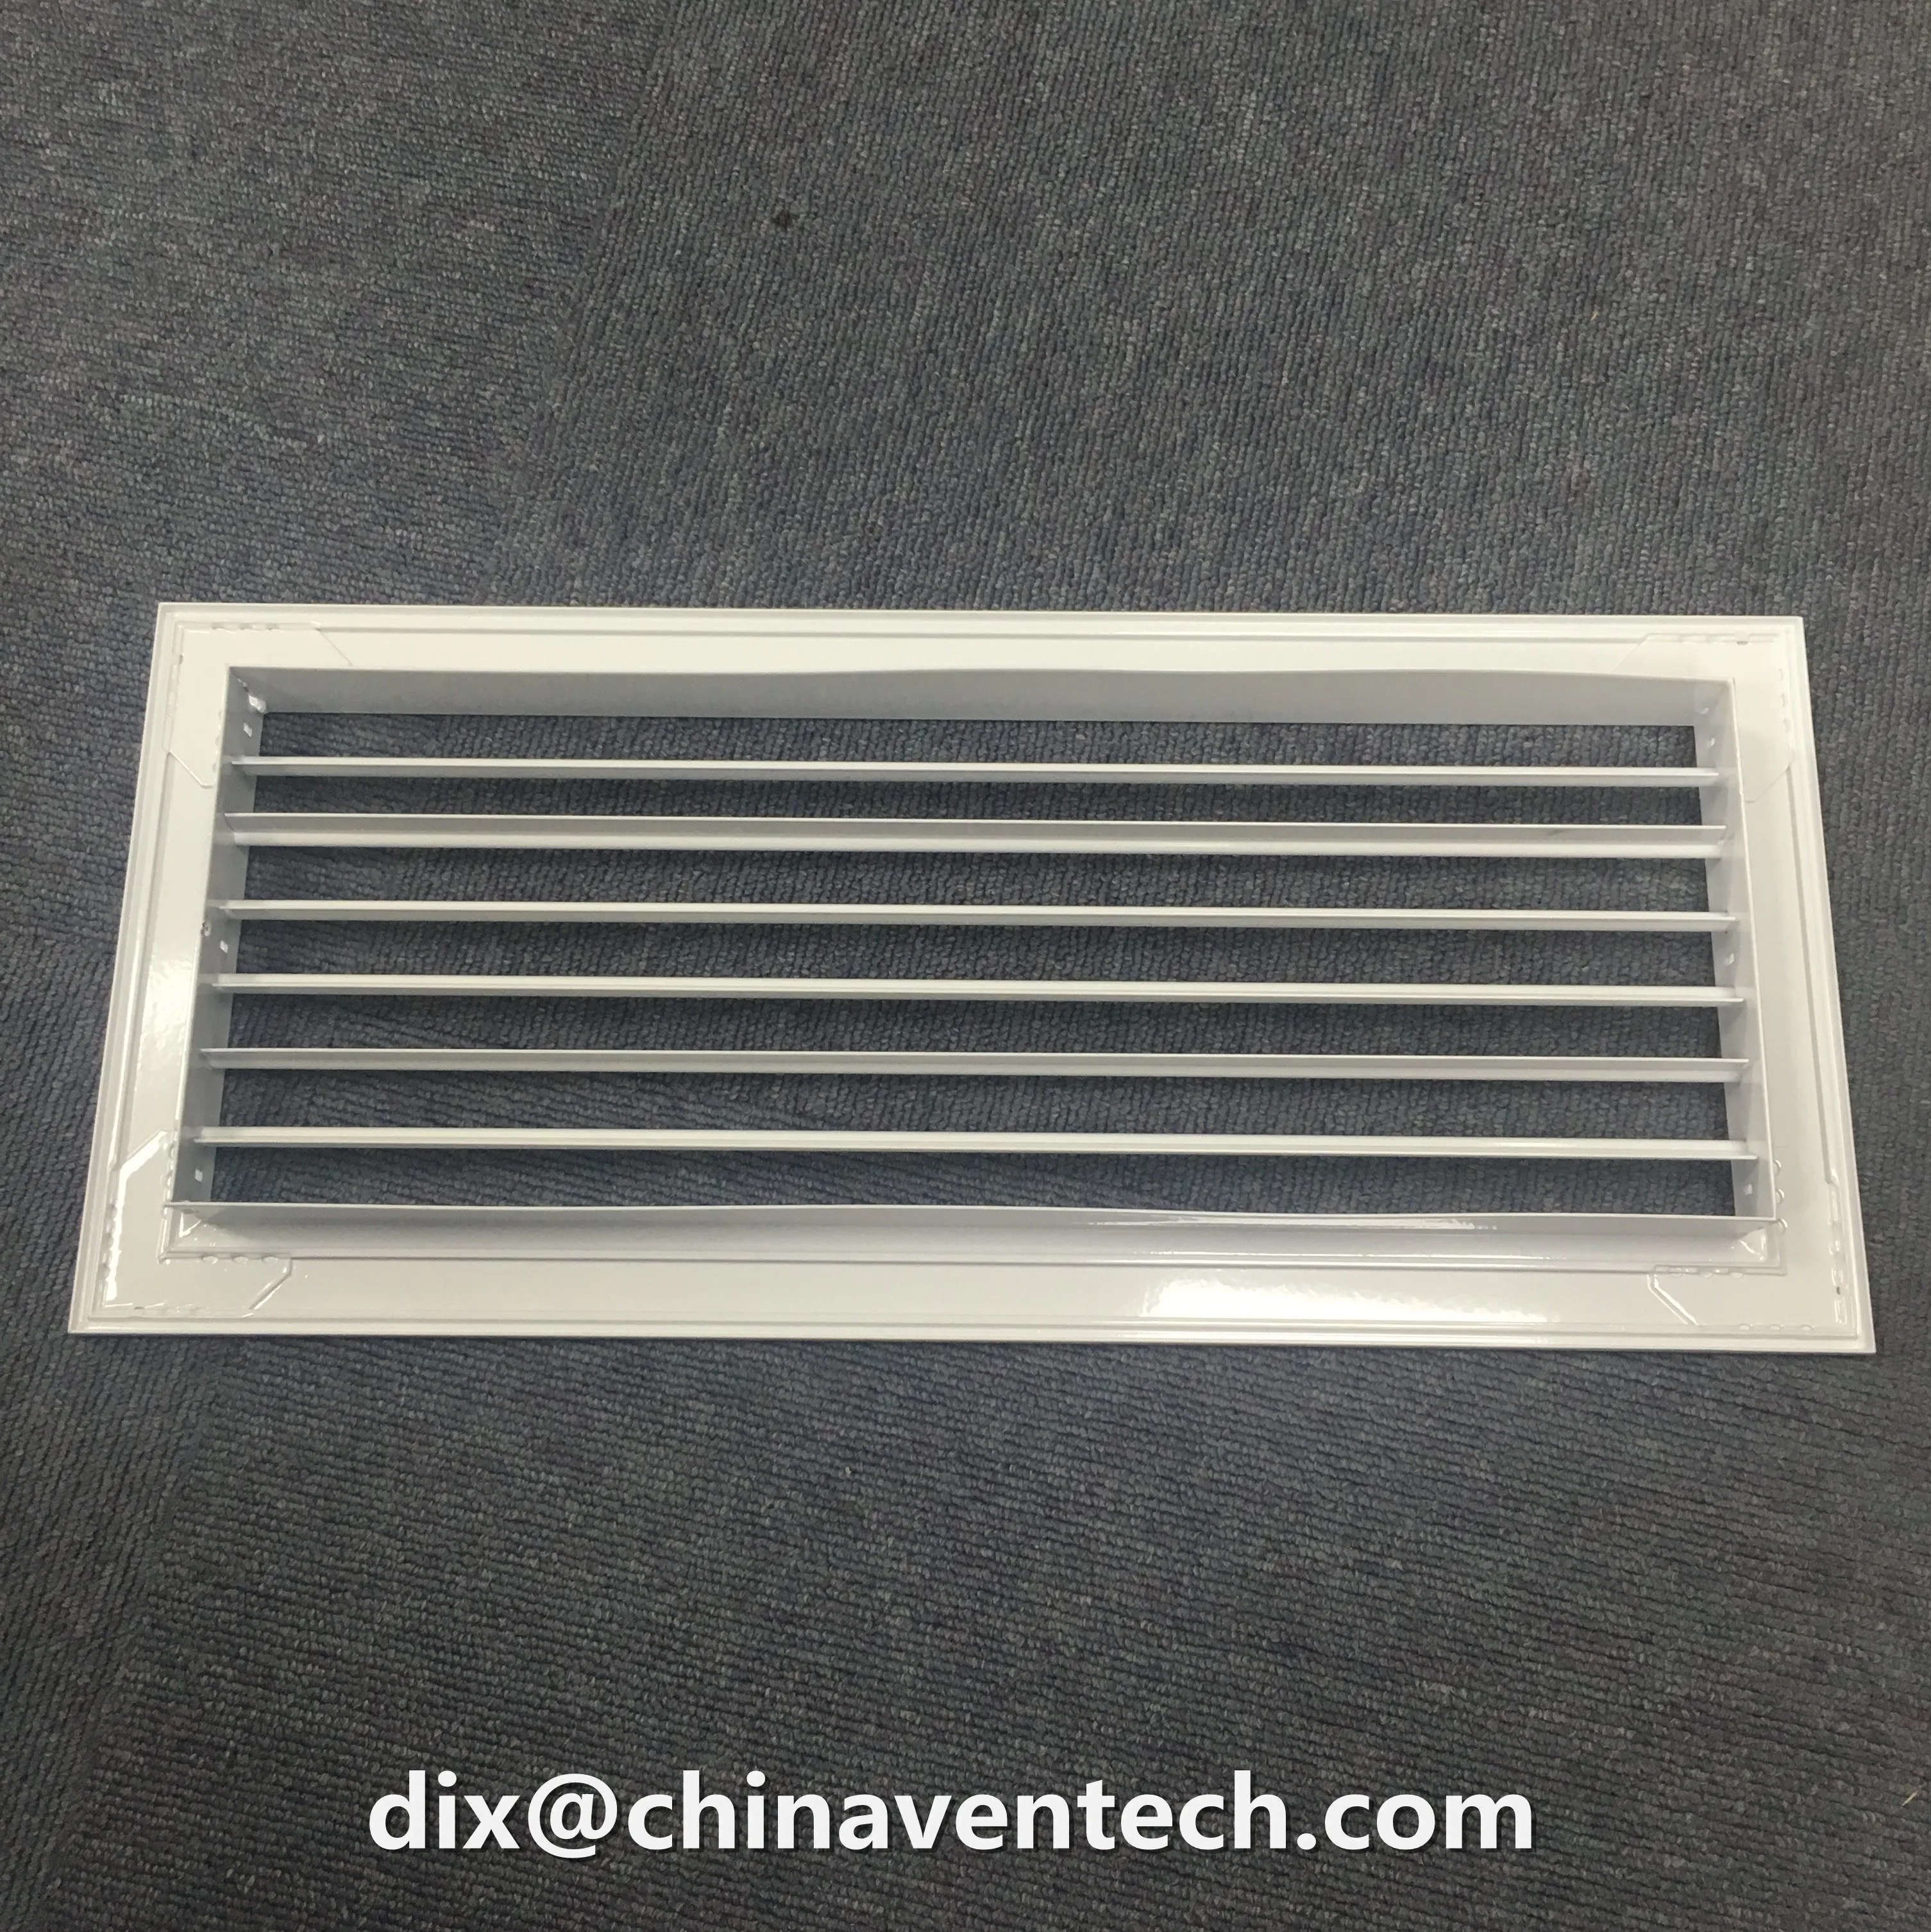 Ventech Hvac system ceiling mounted aluminum supply air grille double deflection register